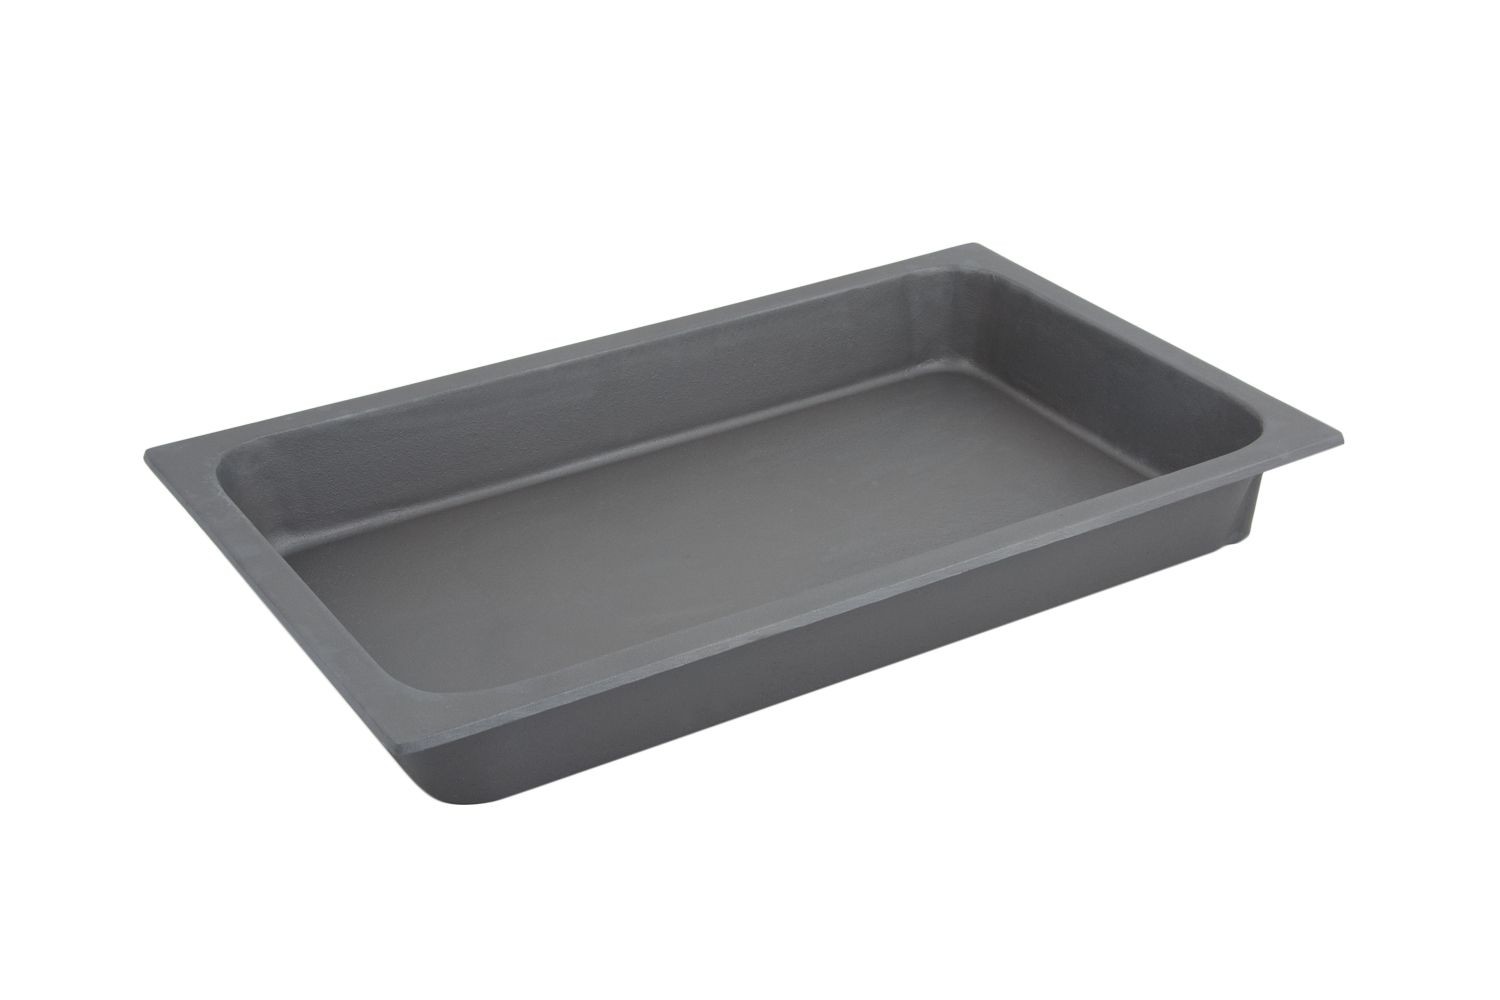 Bon Chef 5066T Full-Size Tempo Chafer Food Pan, 21" x 13" x 2 3/4"